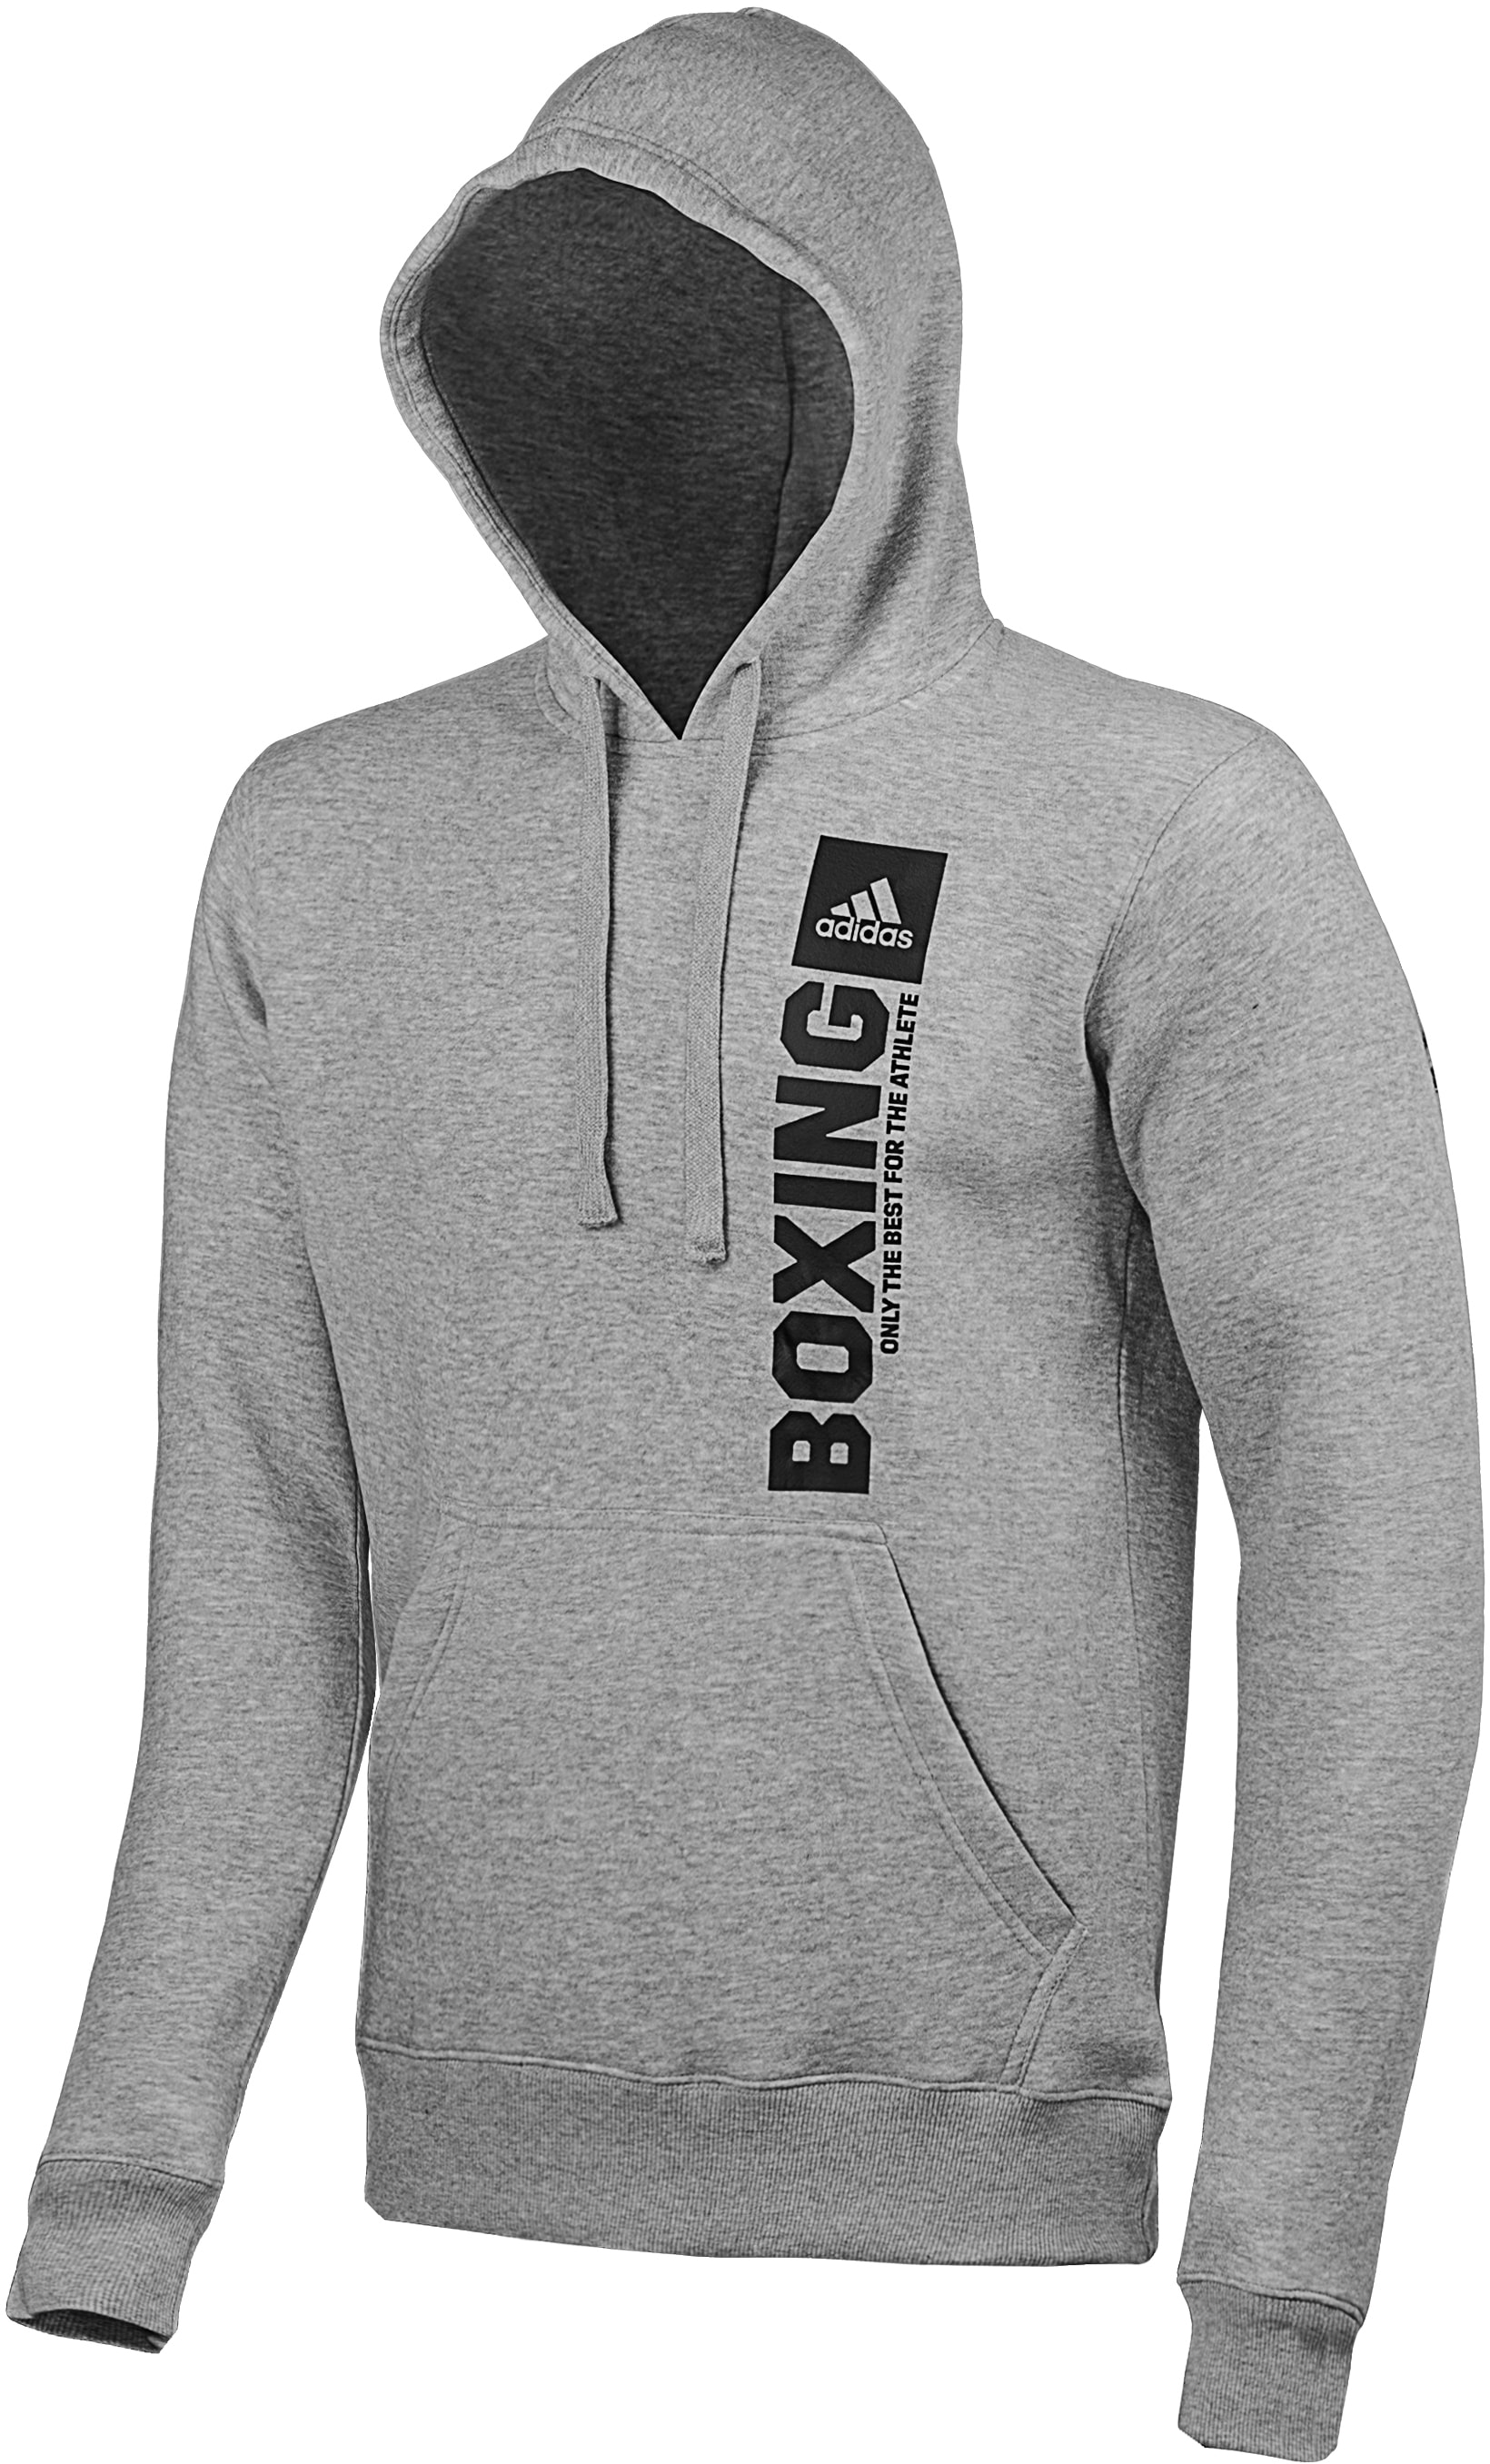 Hoodie Performance Vertical Hoody adidas bei OTTO »Community online BOXING«